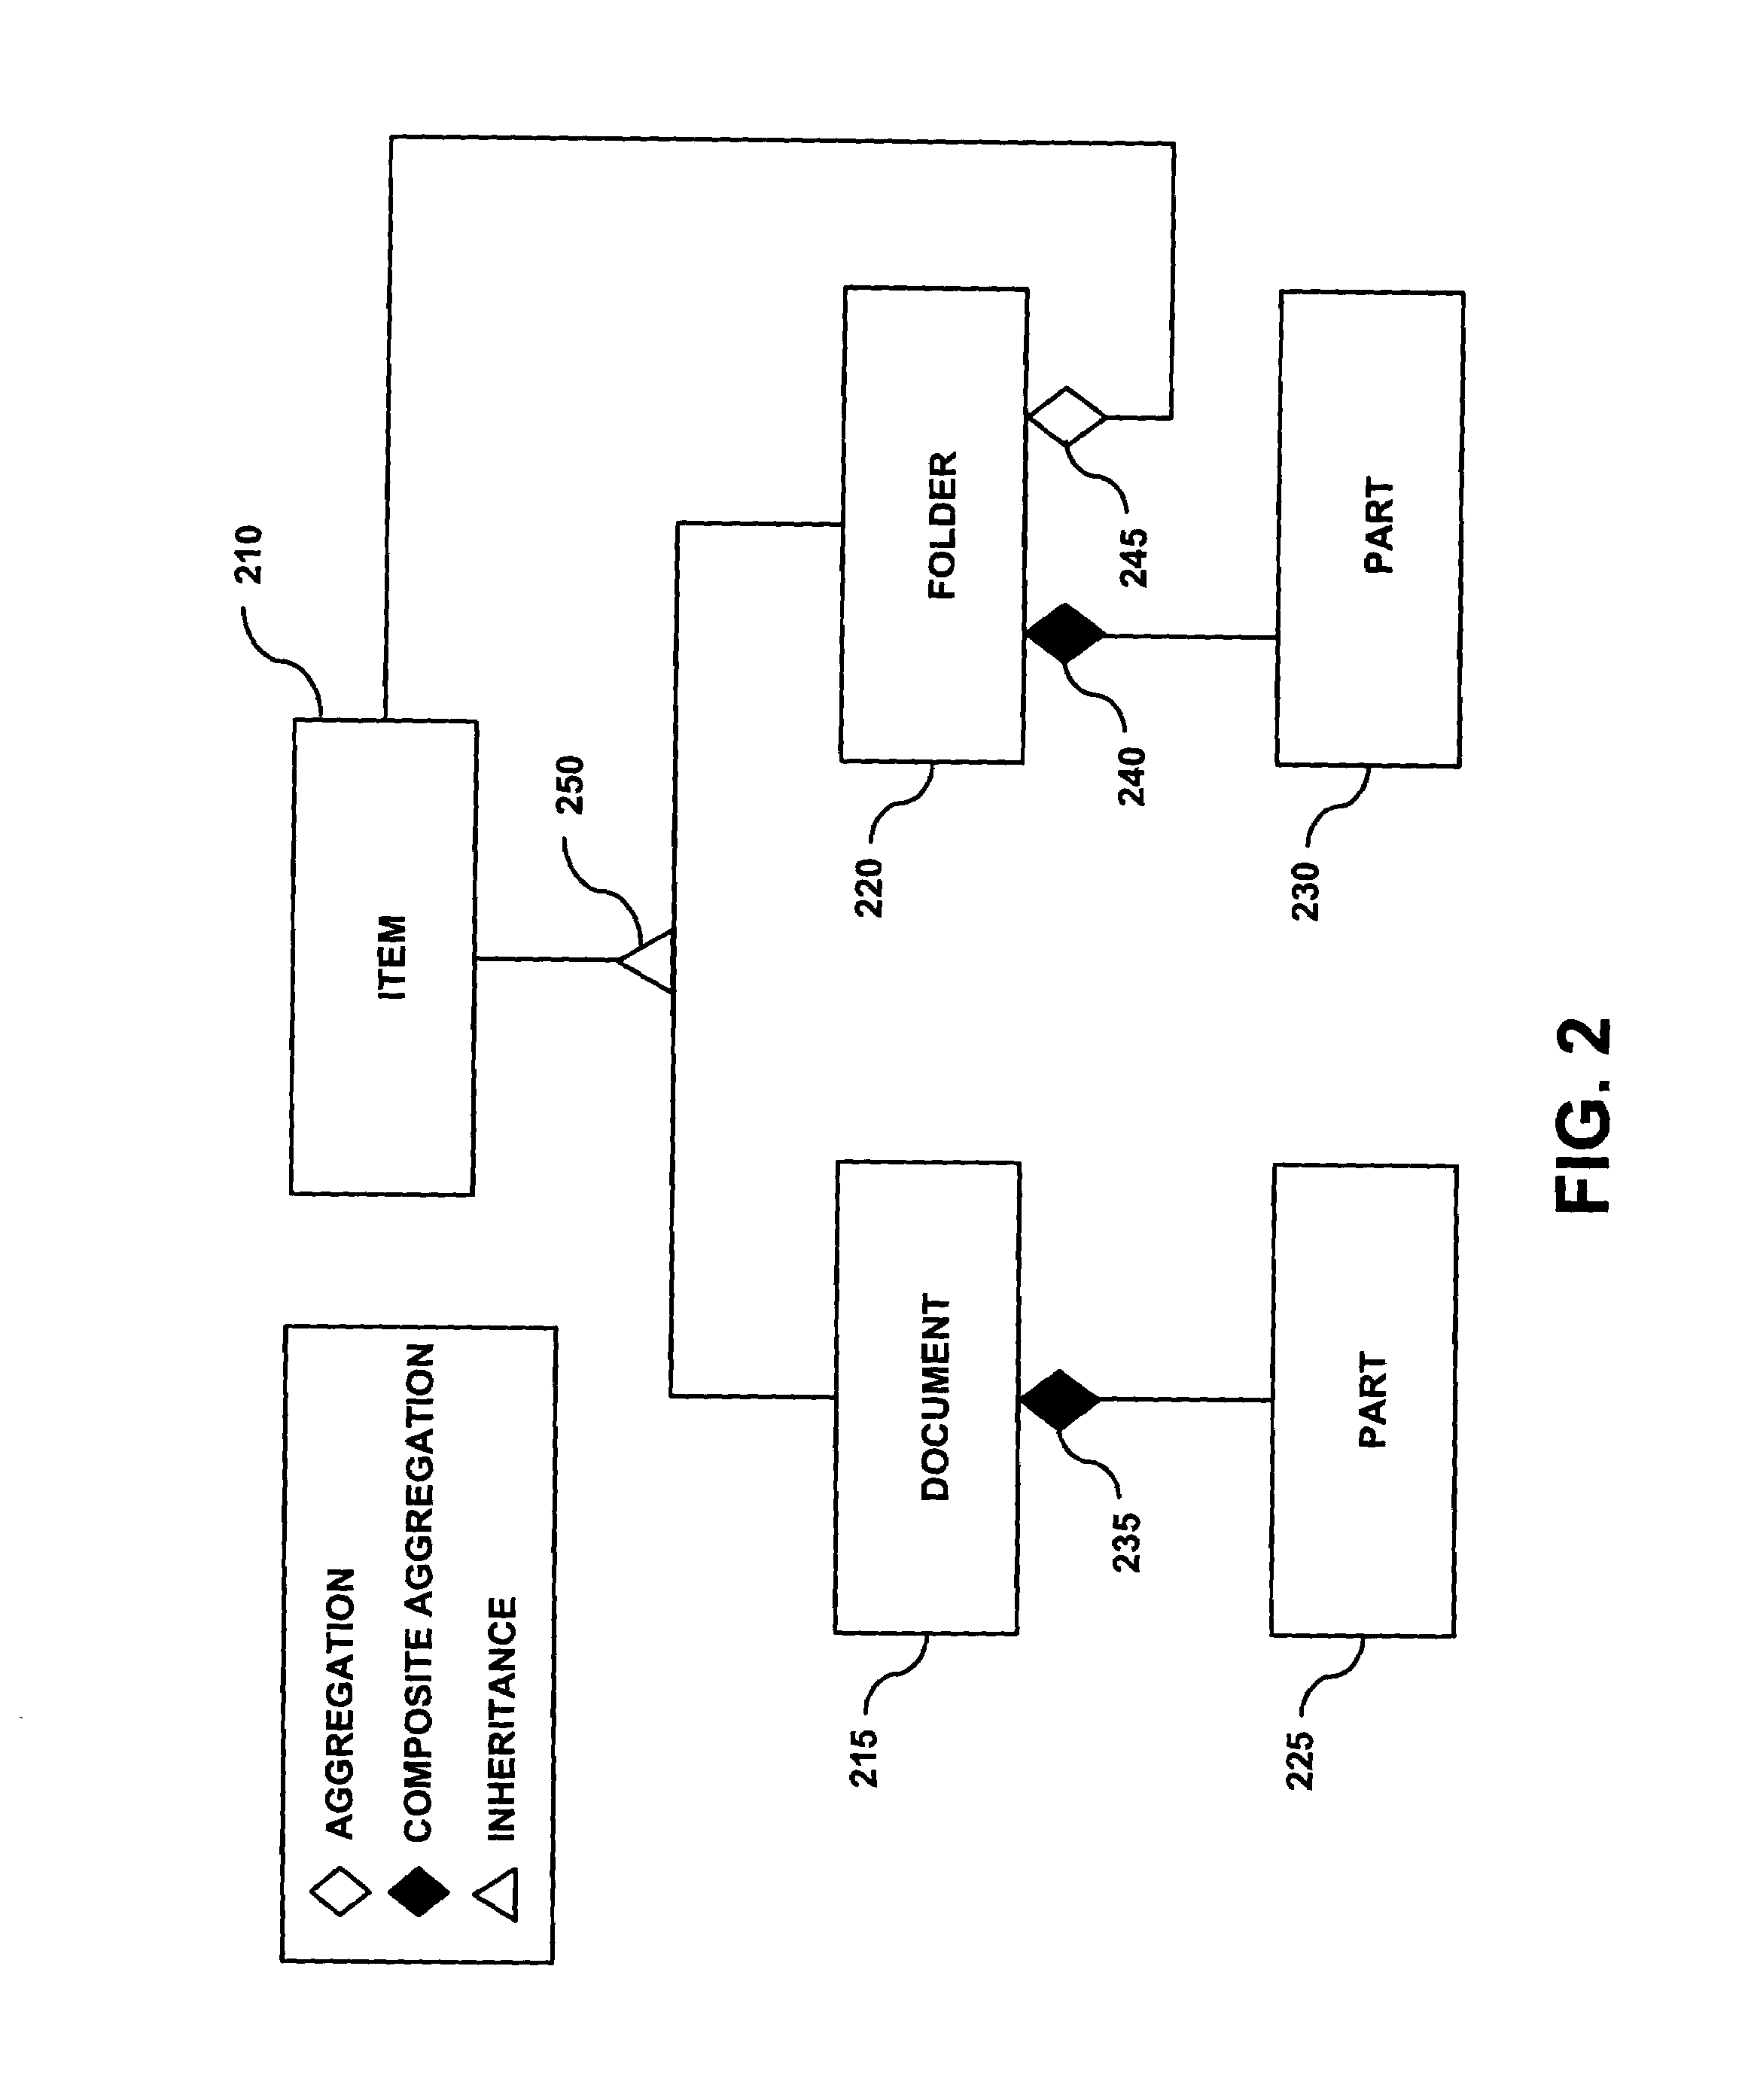 Method for managing persistent federated folders within a federated content management system